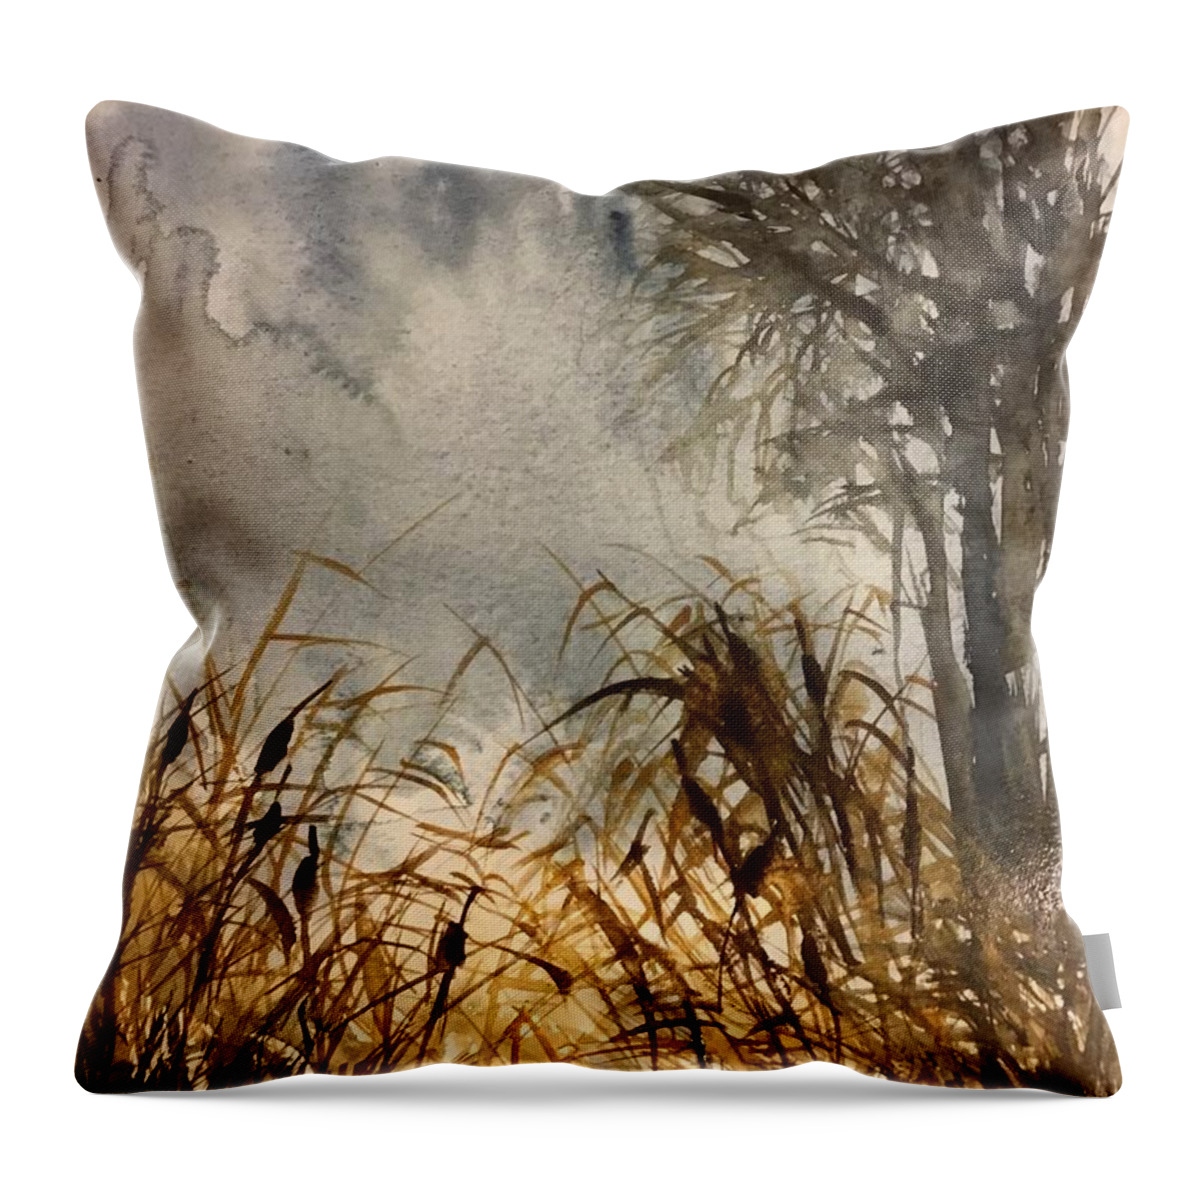 1142029 Throw Pillow featuring the painting 1142019 by Han in Huang wong